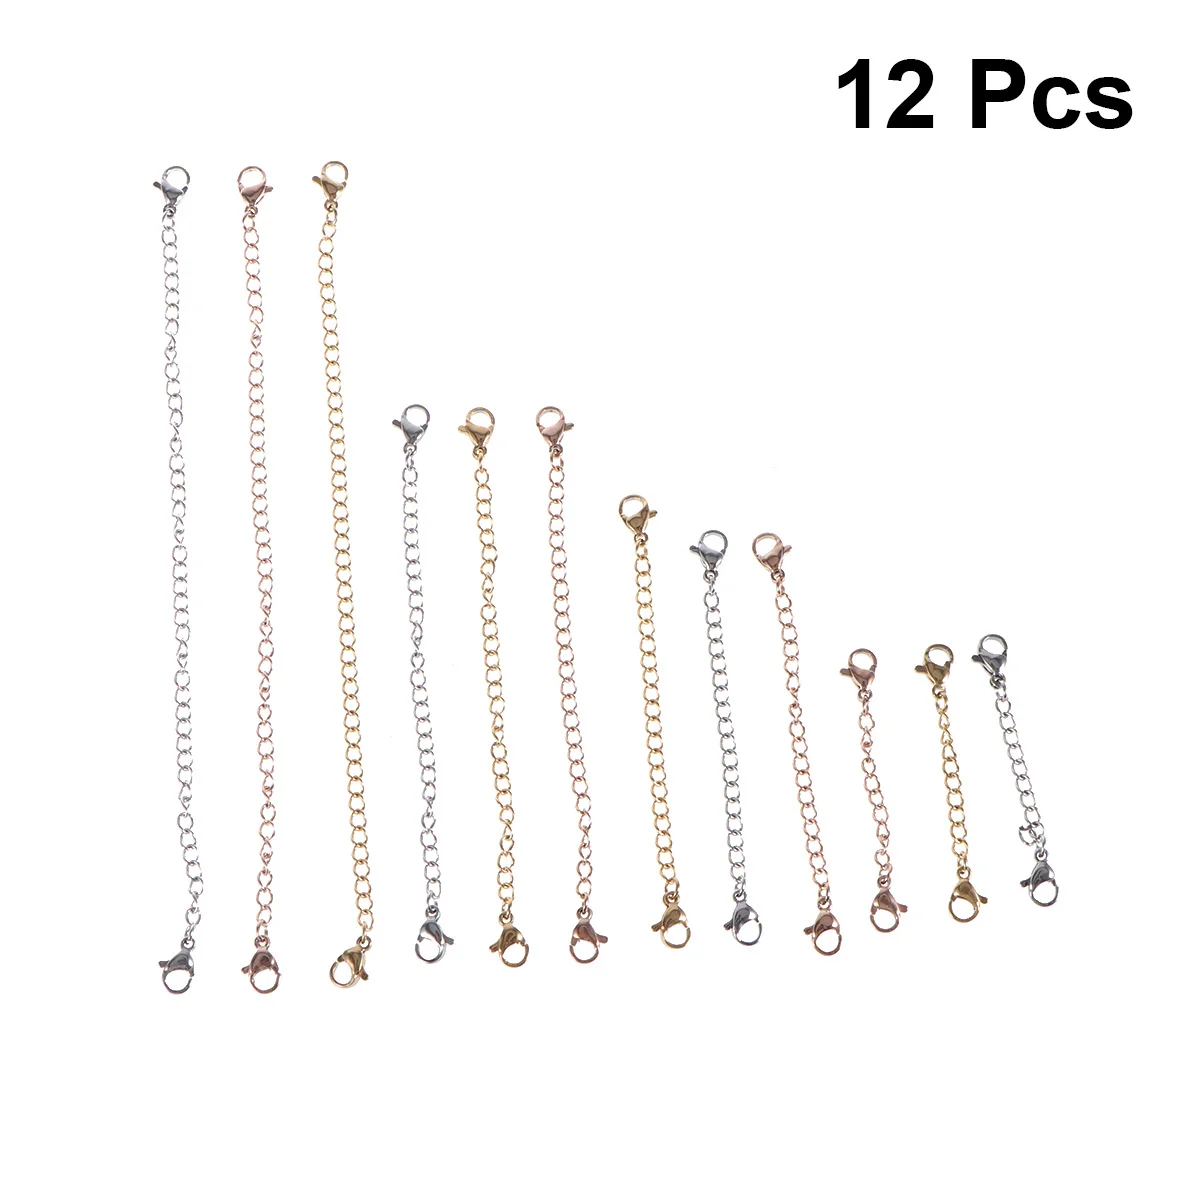 

12 PCS Chain Lobster Clasp Both Ends Sterling Silver Chains Women Stainless Steel Mens Necklace